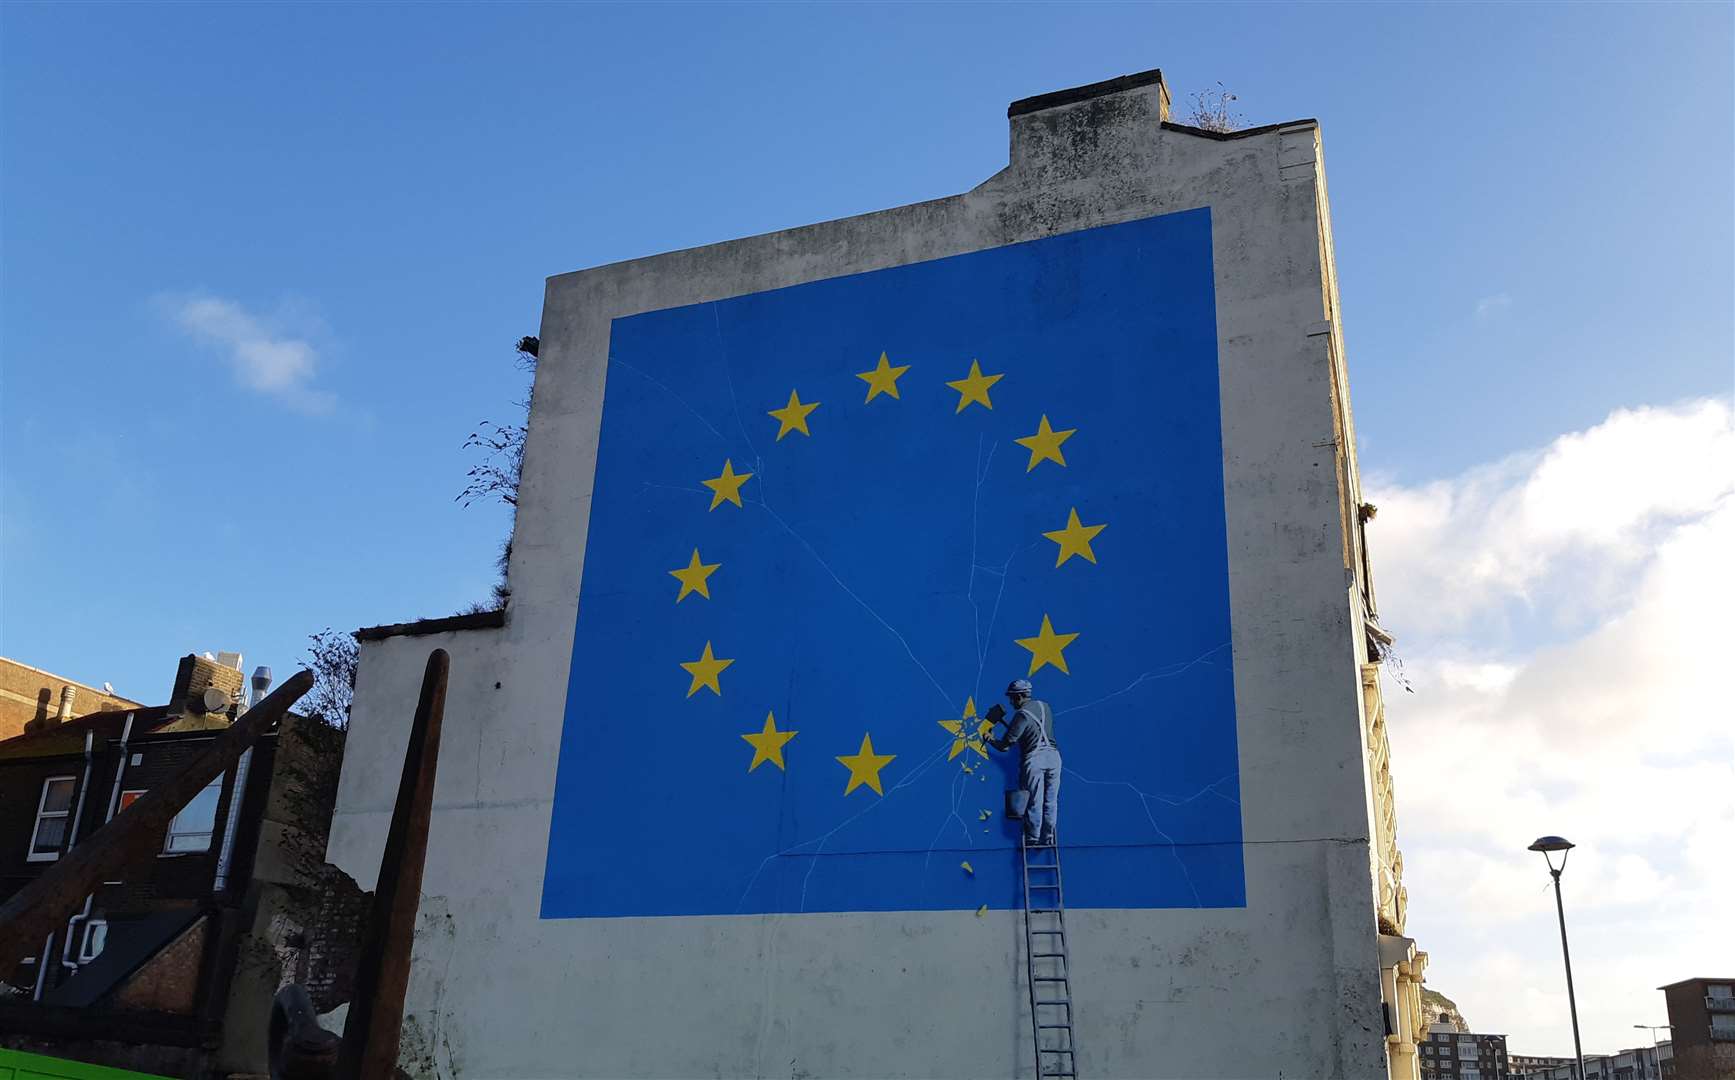 The Banksy Brexit mural in Bench Street, which was up from 2017 to 2019